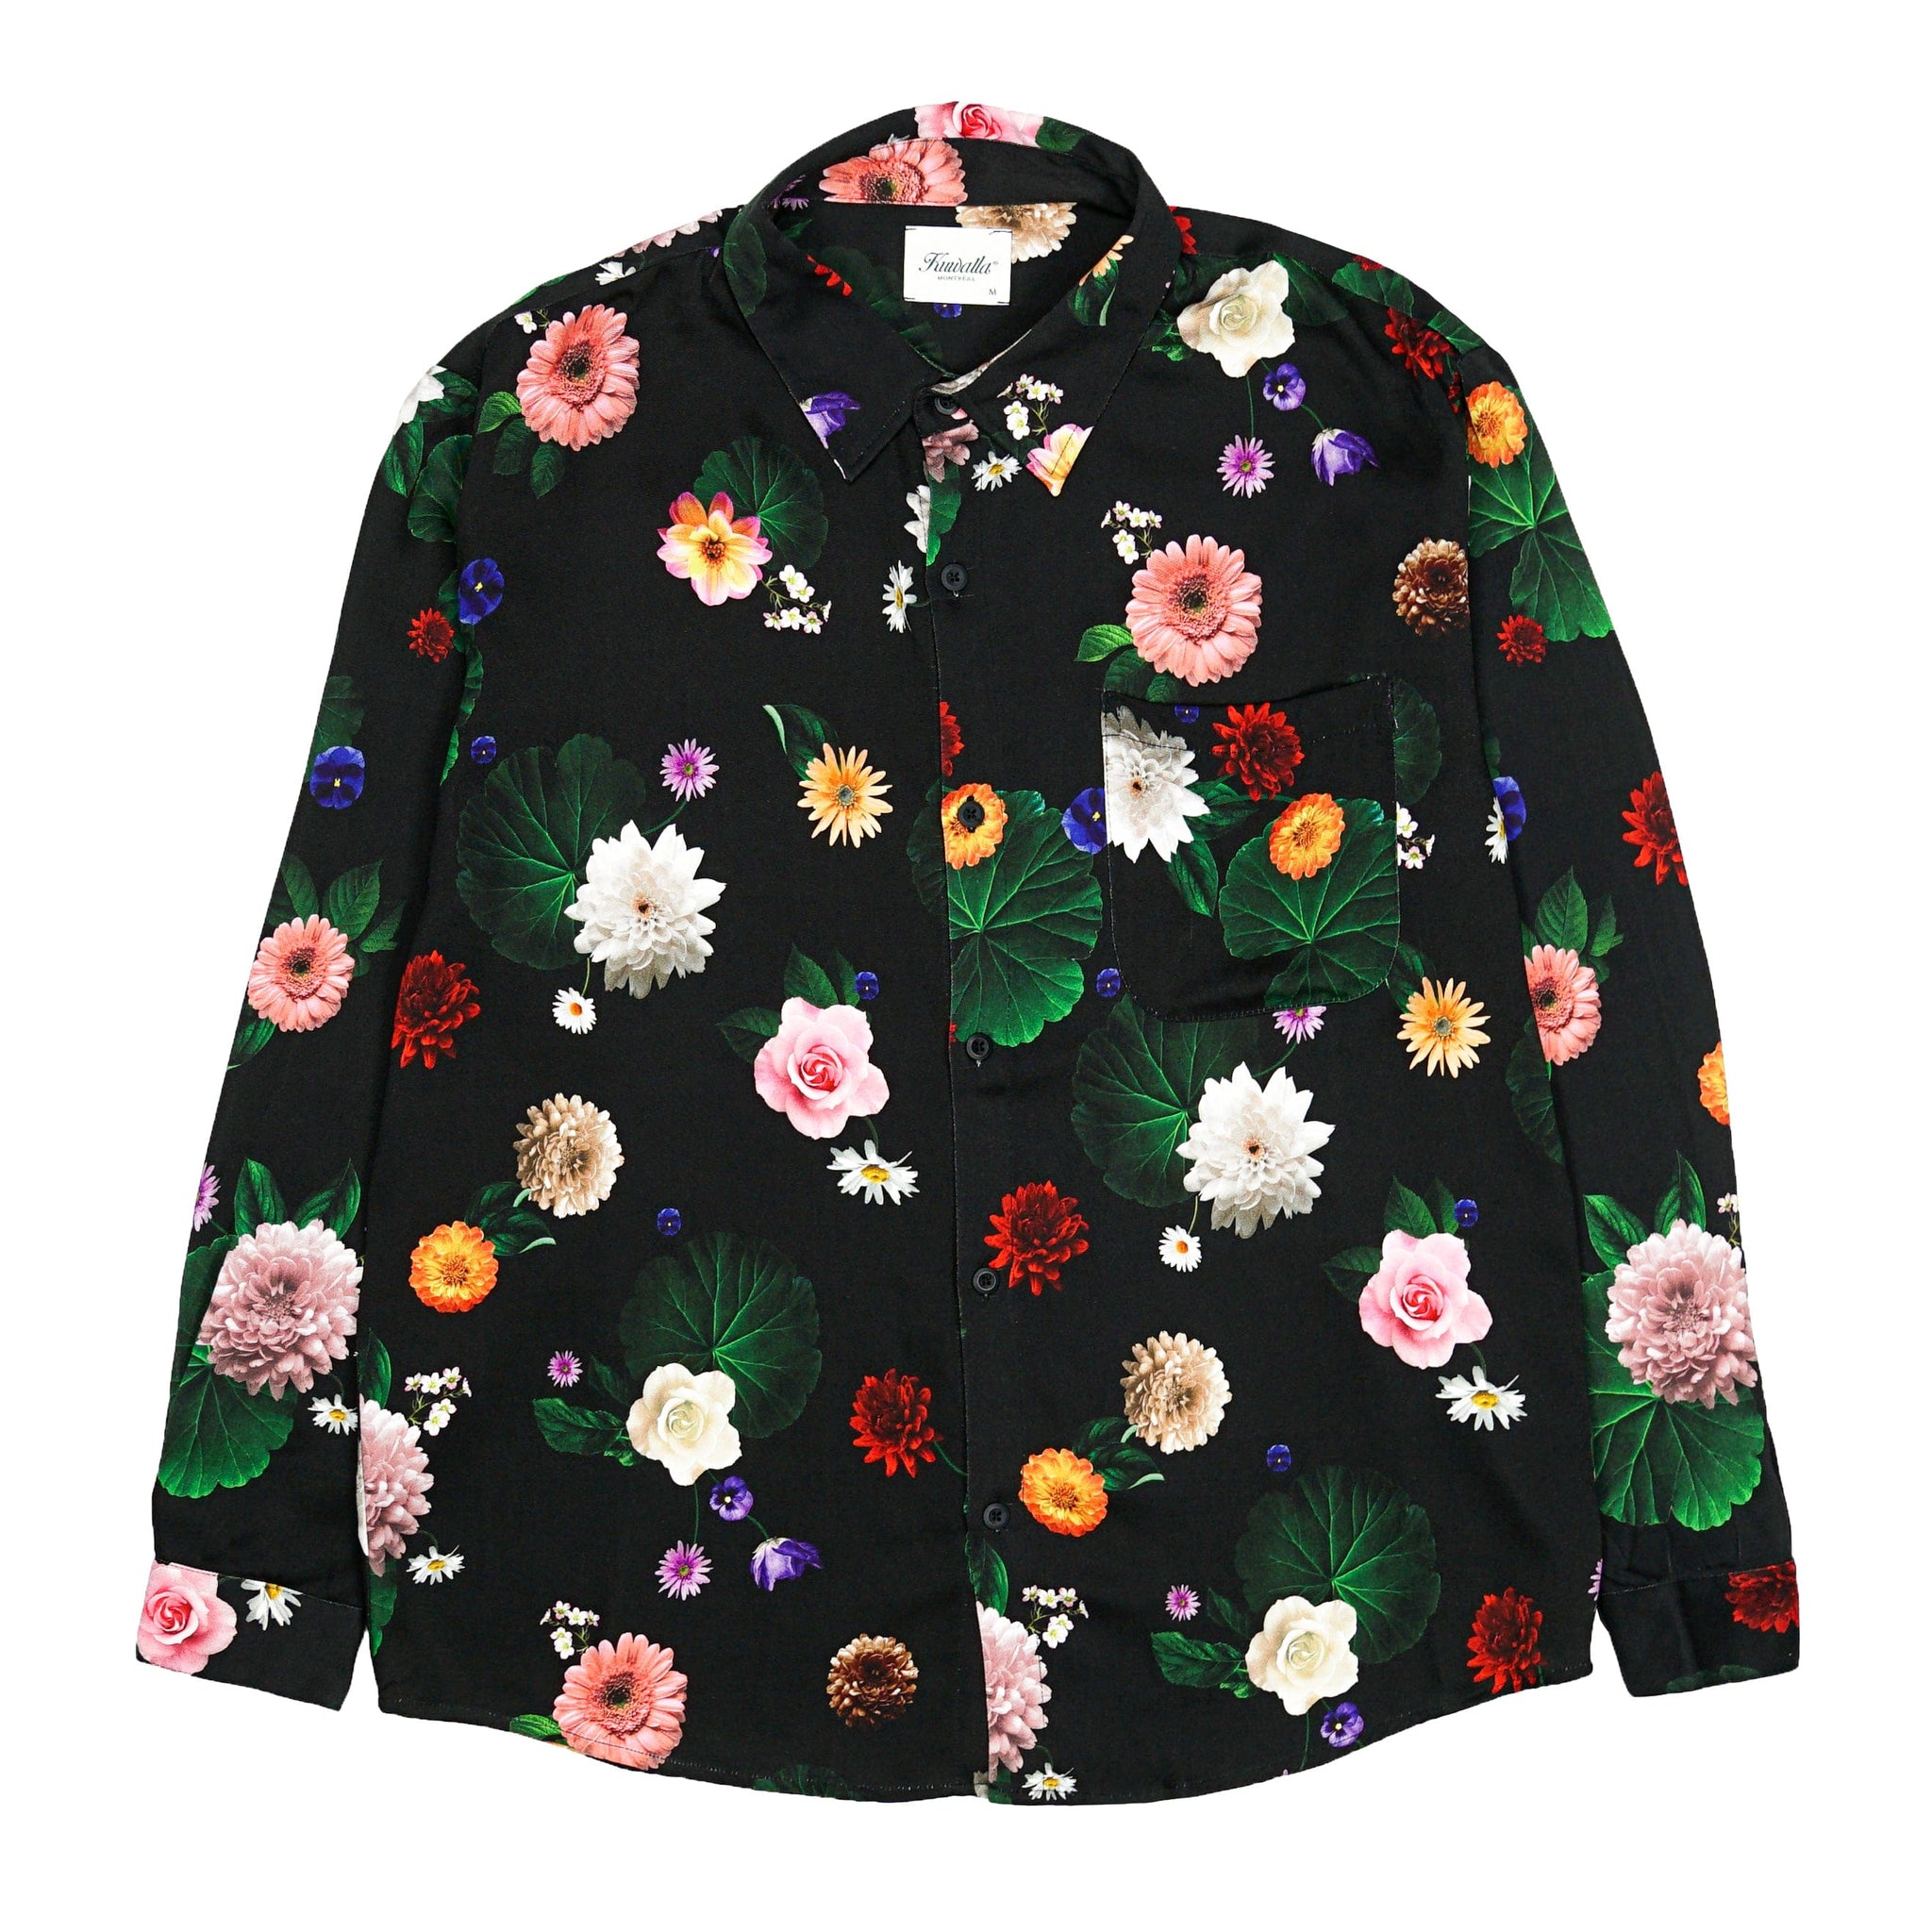 Long Sleeve Yacht Shirt in floral